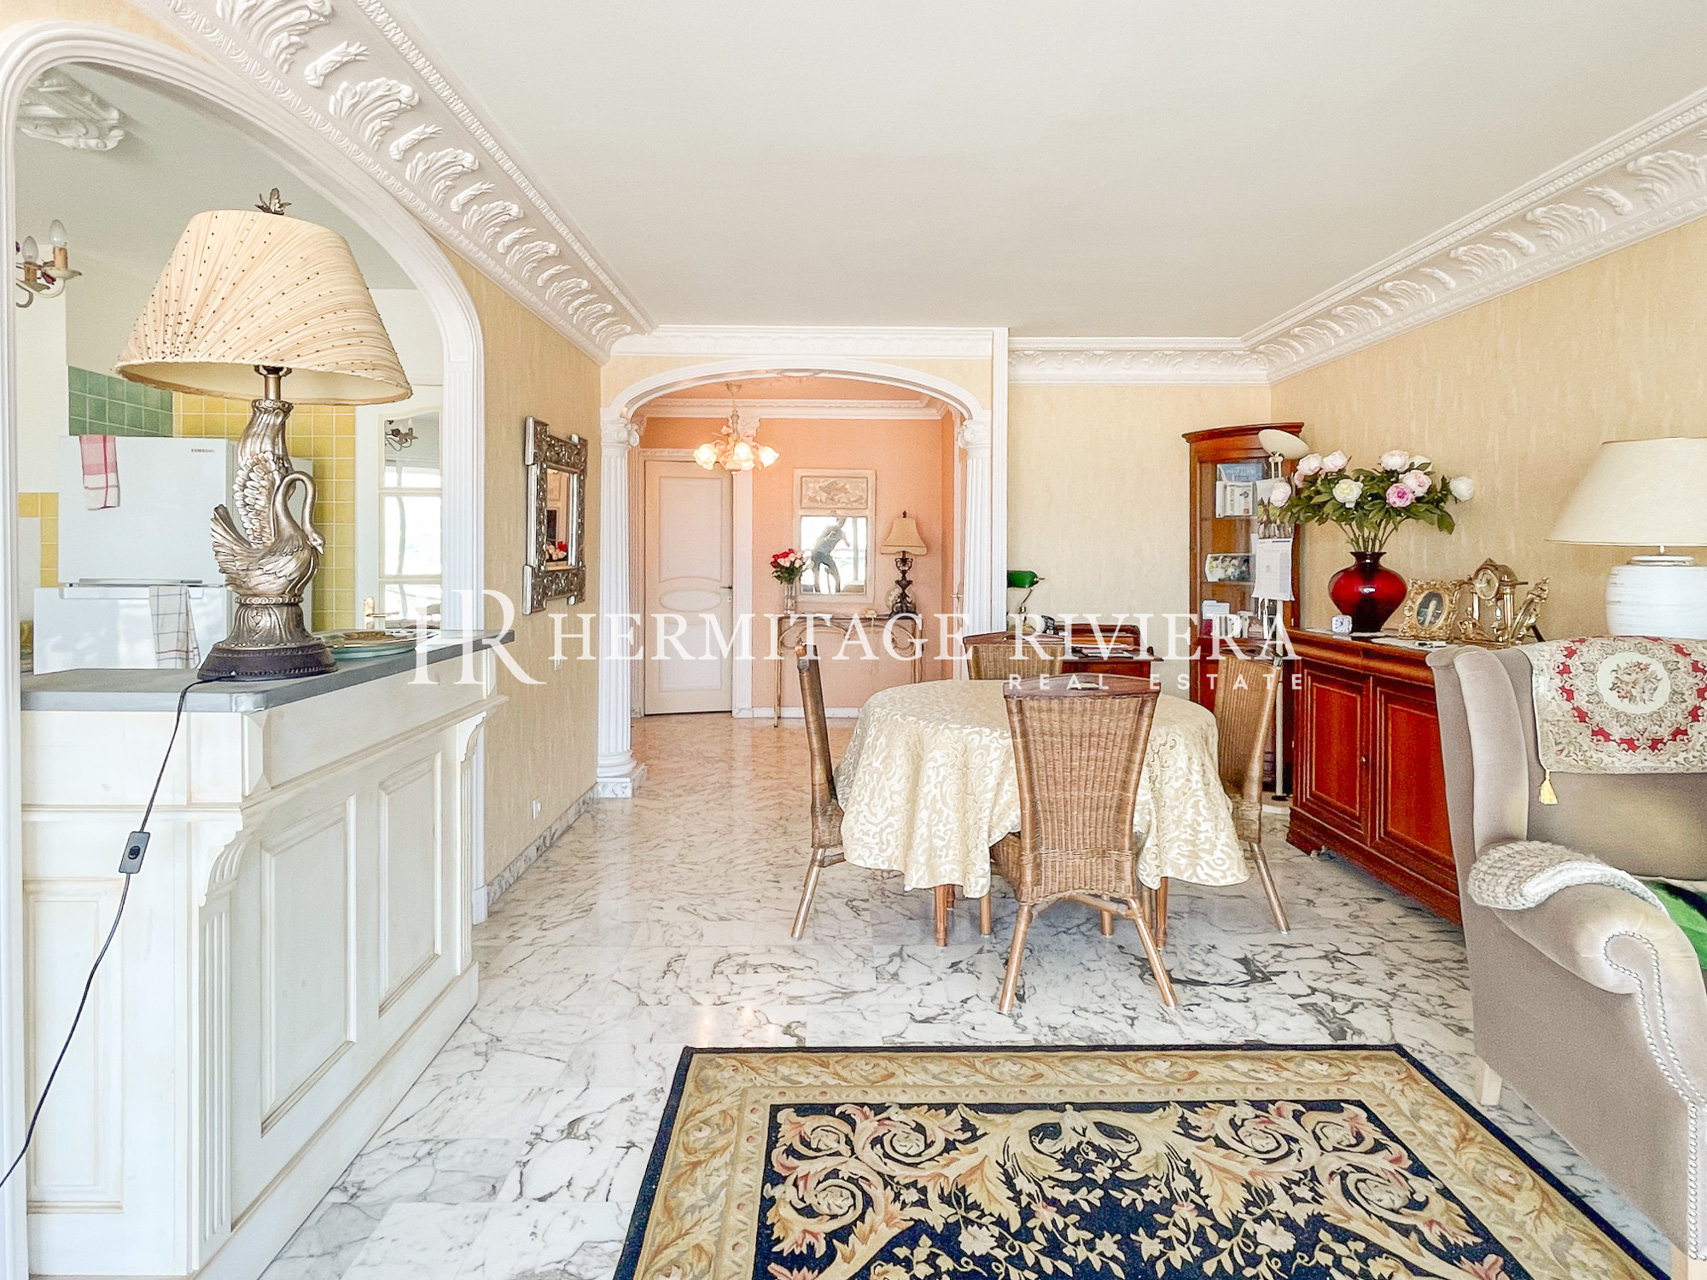 Top floor two bedroom apartment with views over Nice and the sea (image 4)